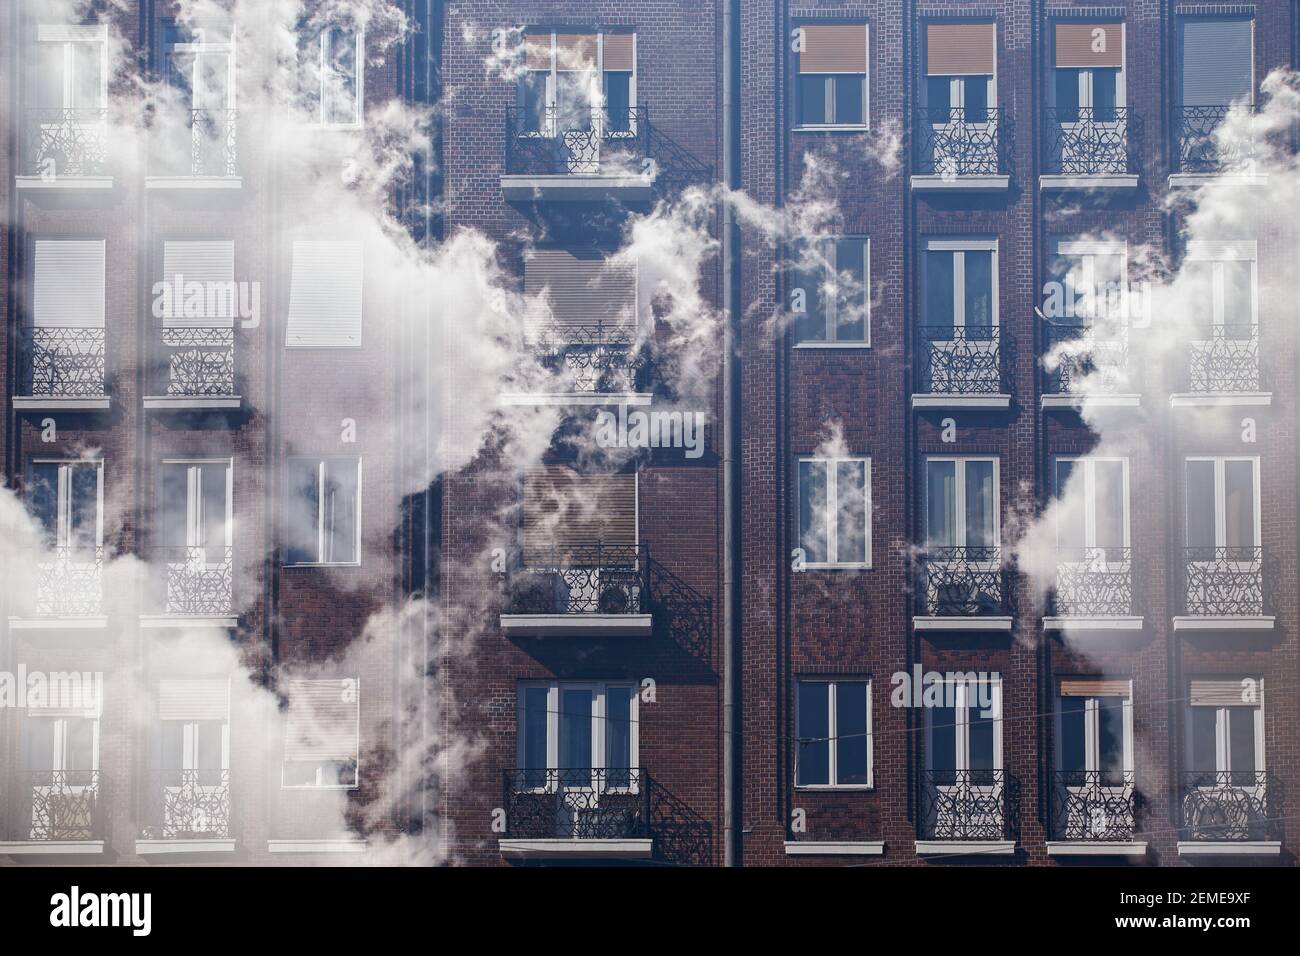 Illustration of global warming, smog city, greenhouse effect: house with clouds made by multiple exposure at Budapest, capital city of Hungary; color Stock Photo